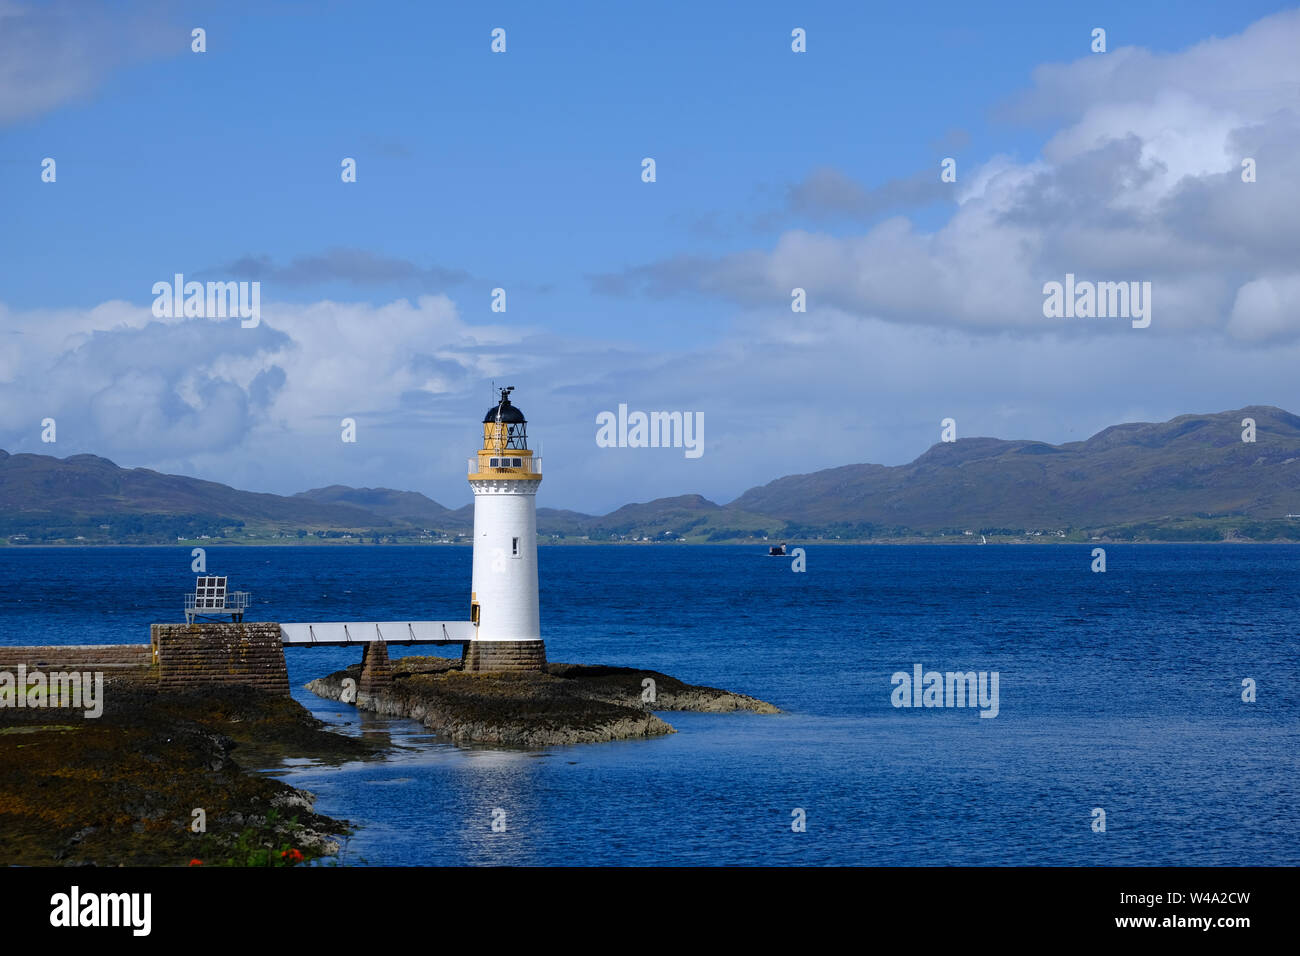 Landscape view of Rubha nan Gall Lighthouse near Tobermory on the Isle of Mull in Scotland on a summer day with blue skies, clouds and a deep blue sea Stock Photo